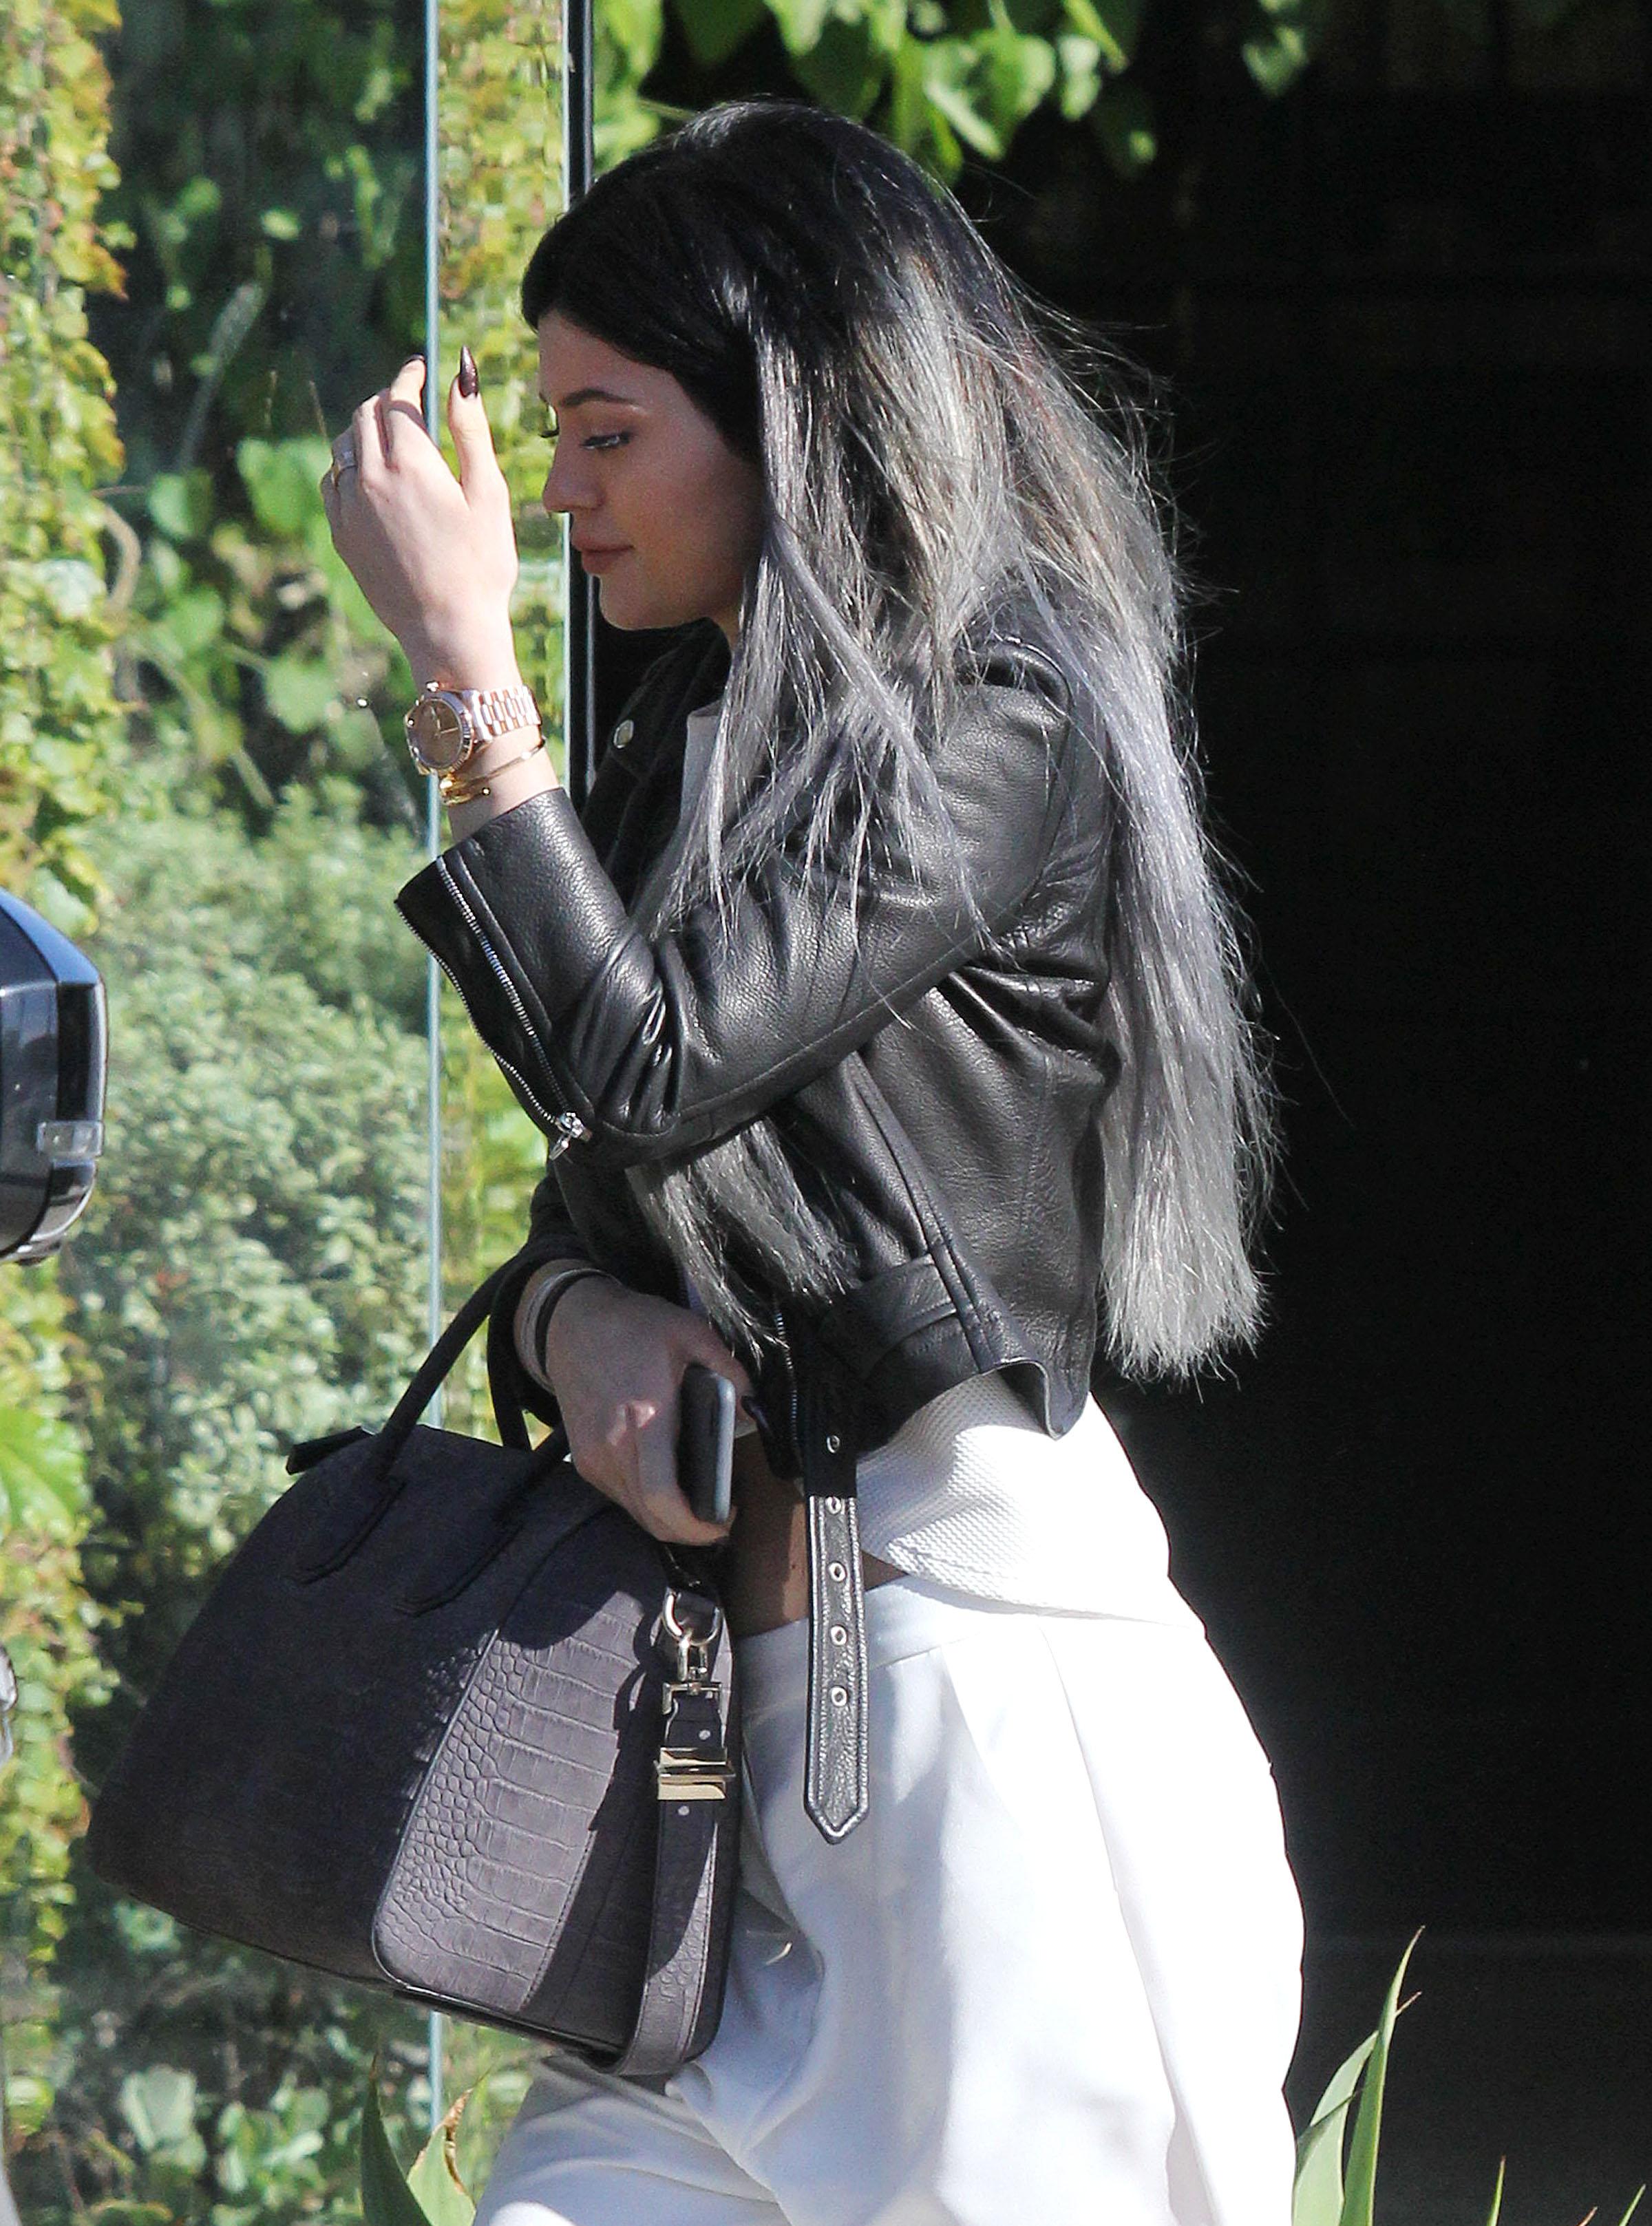 Kylie Jenner showing off her new extensions while leaving Andy LeCompte Salon **NO DAILY MAIL SALES**